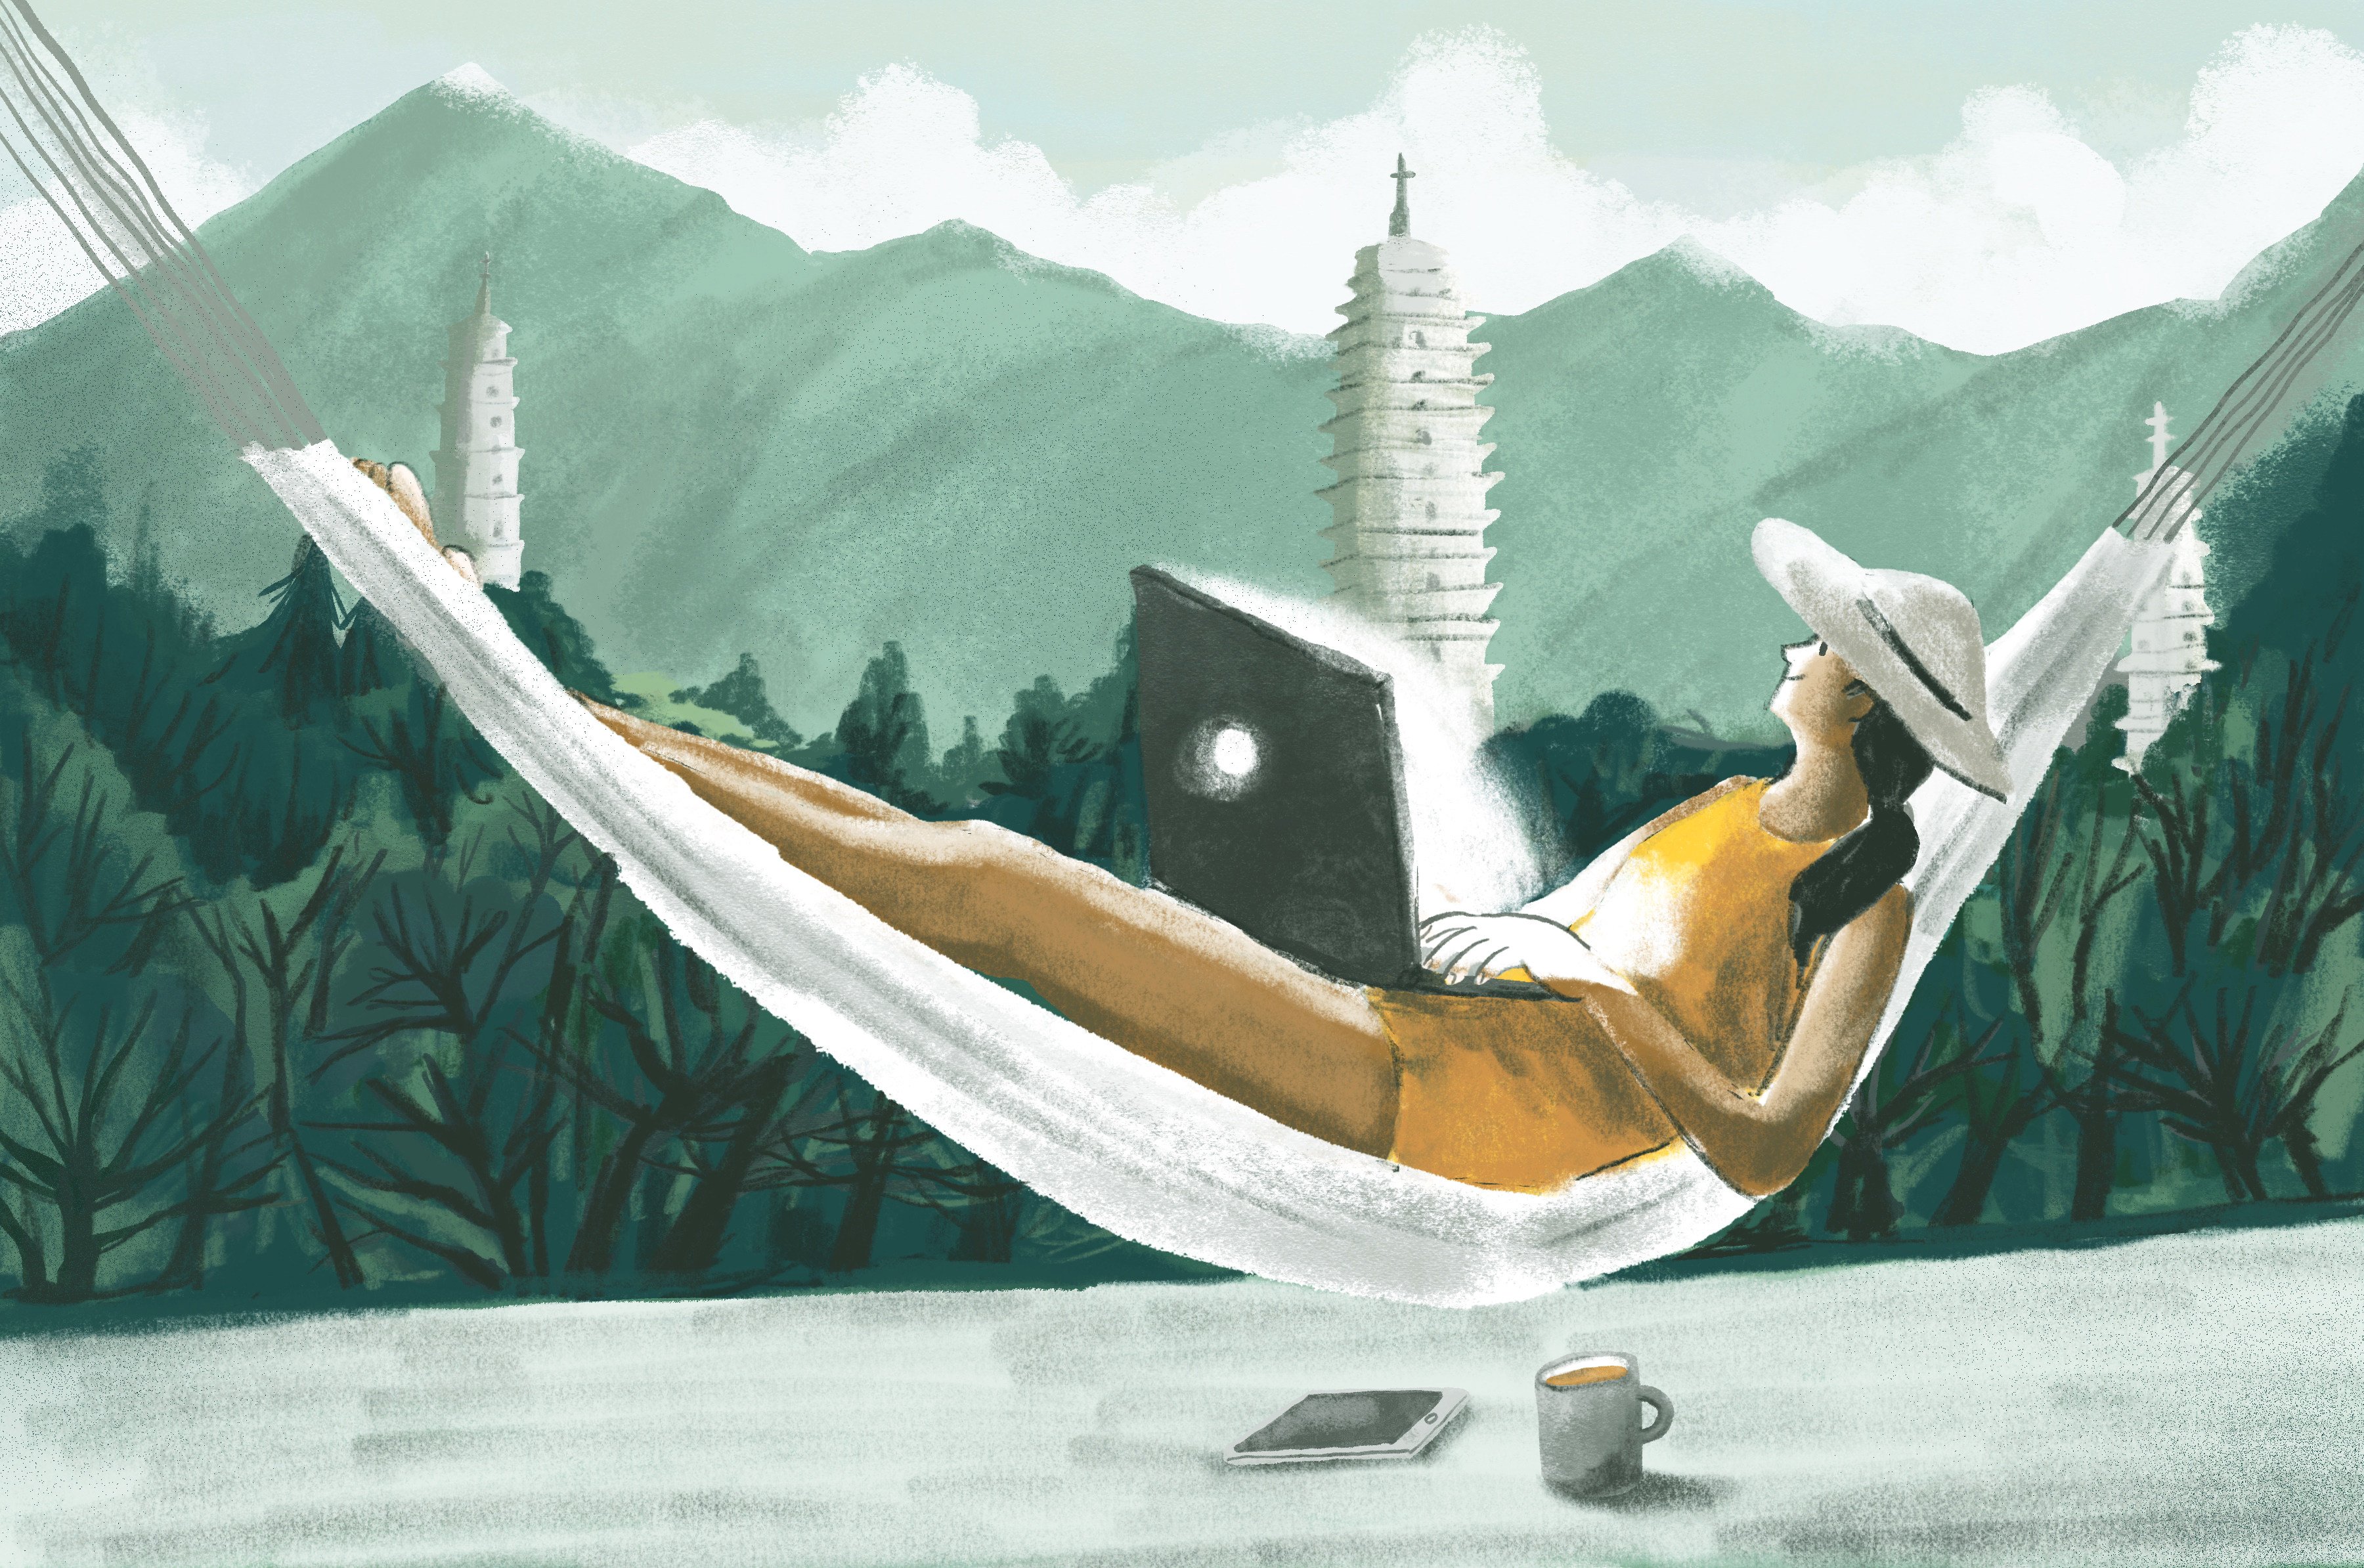 The trend of being able to work remotely is gathering steam among China’s so-called digital nomads. Illustration: Brian Wang